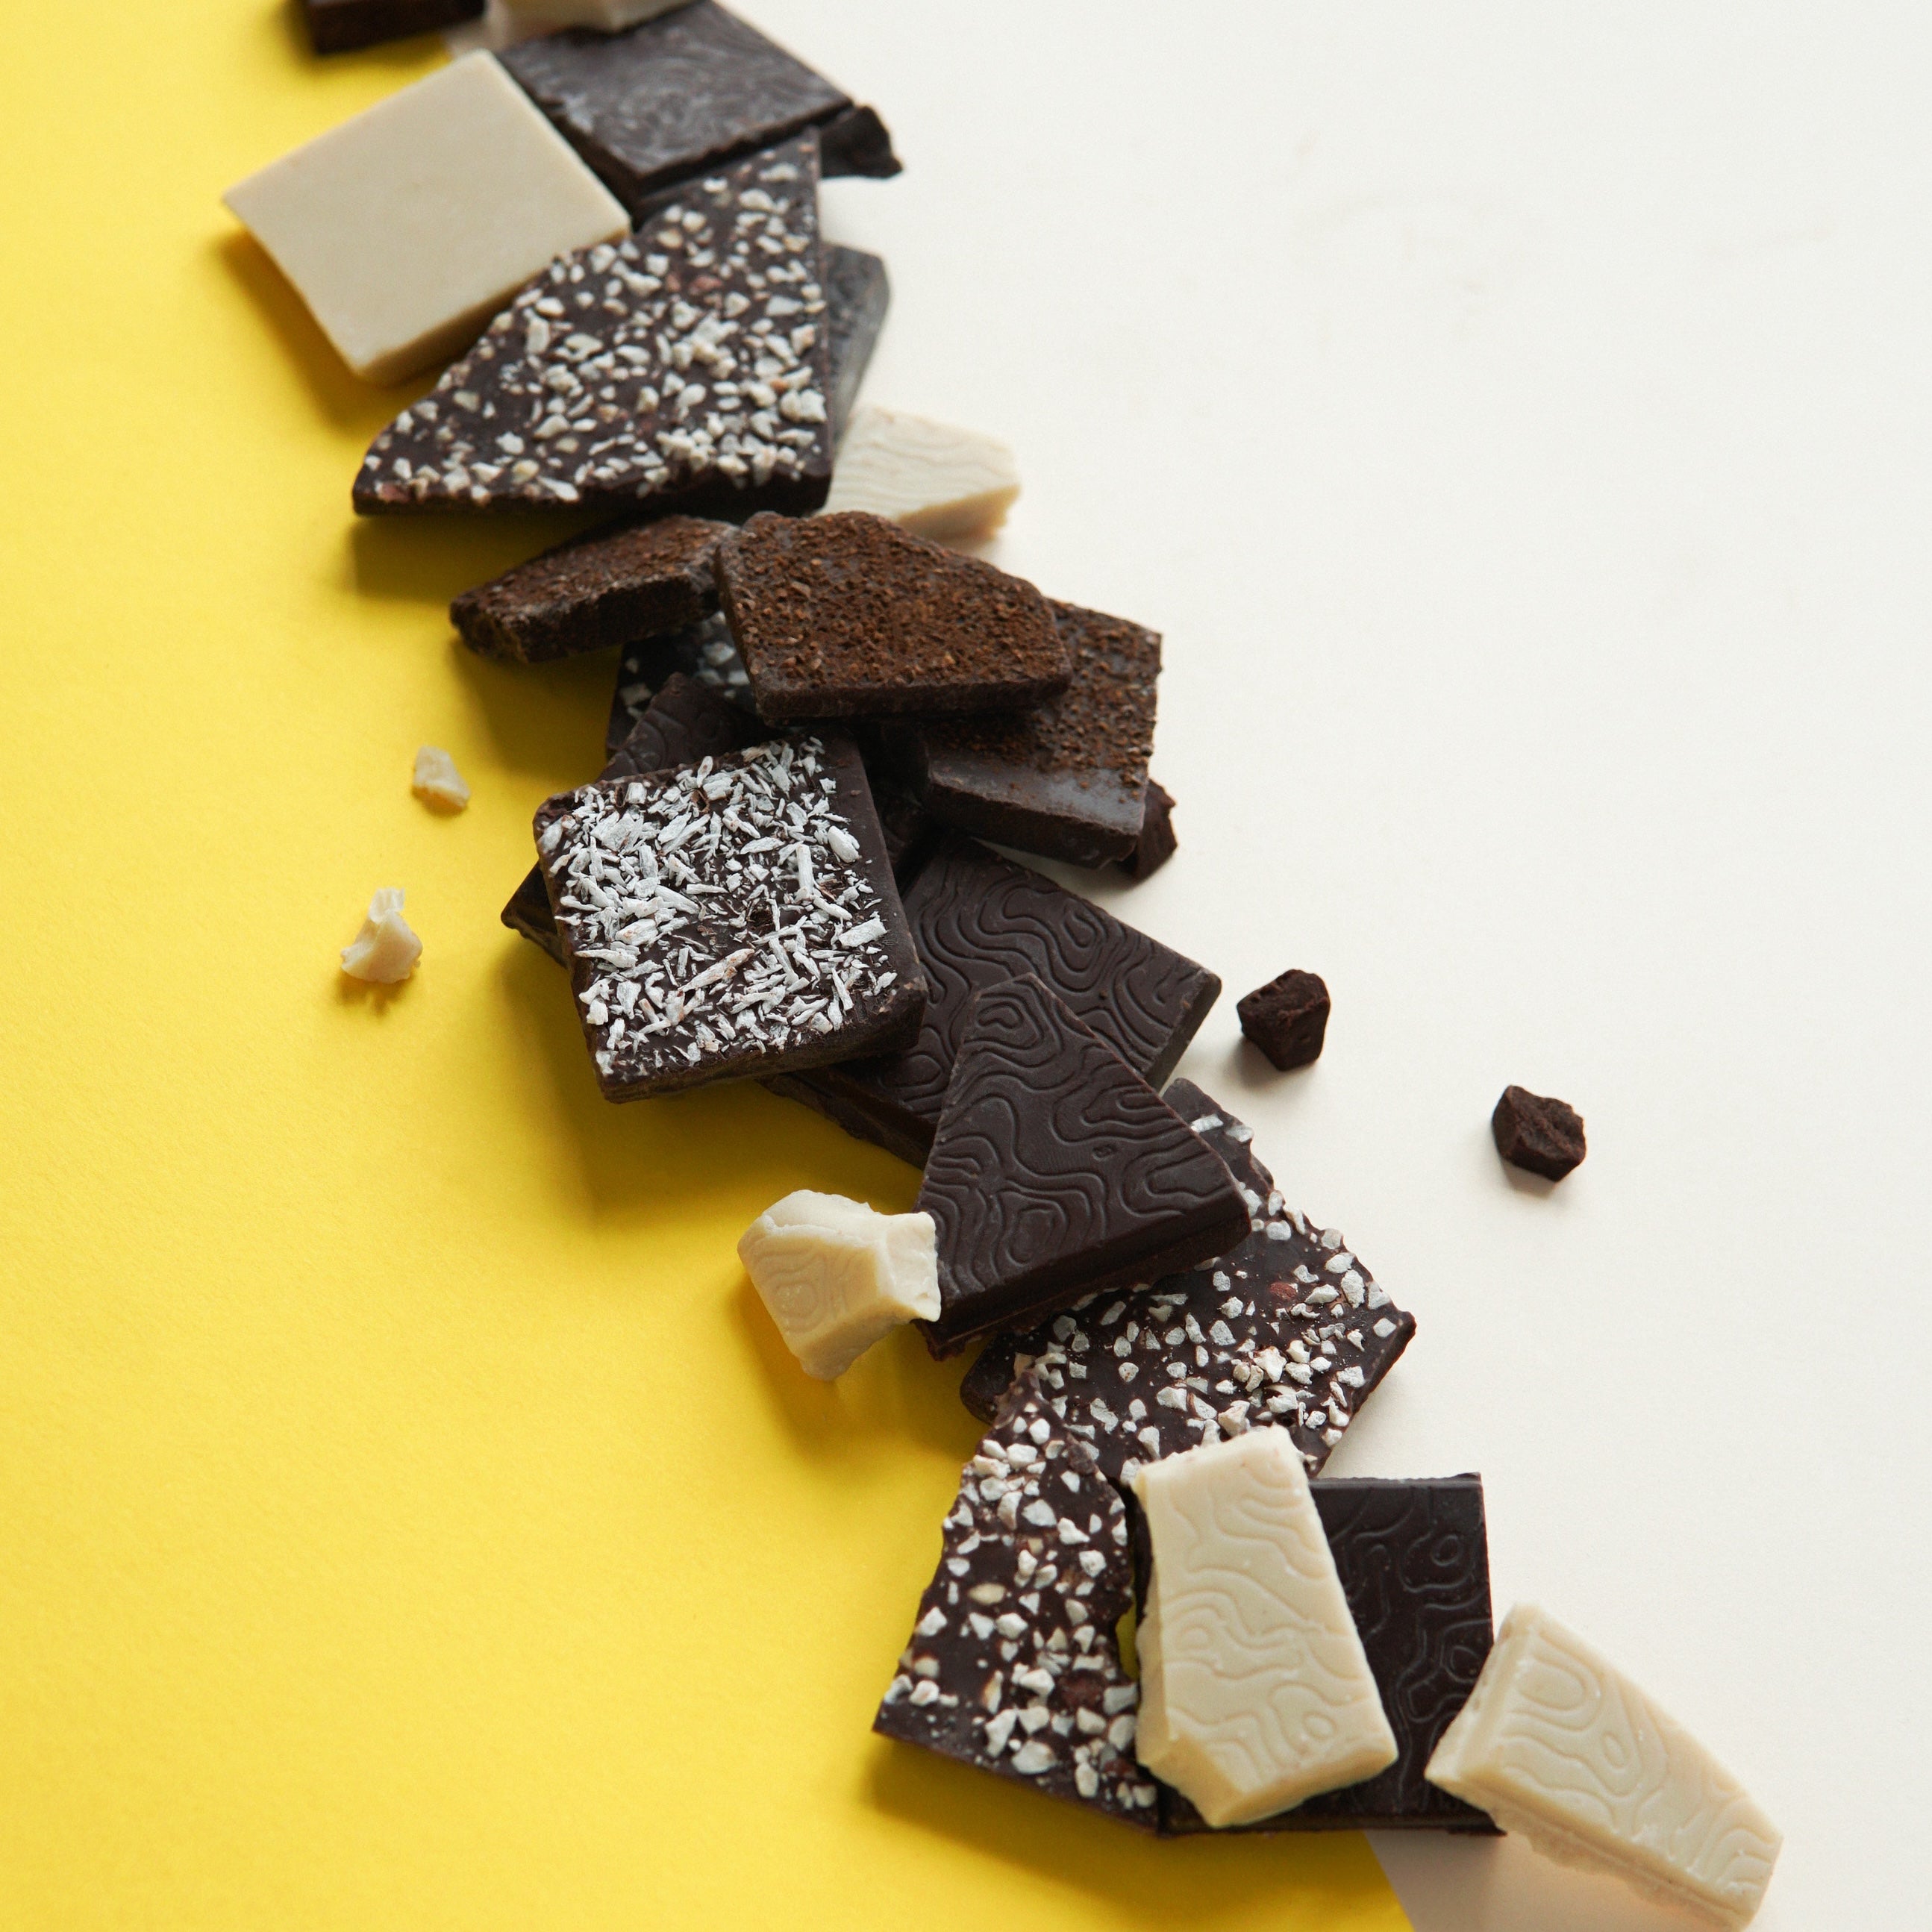 healthy chocolate squares with textures hazelnut, coconut, coffee and white